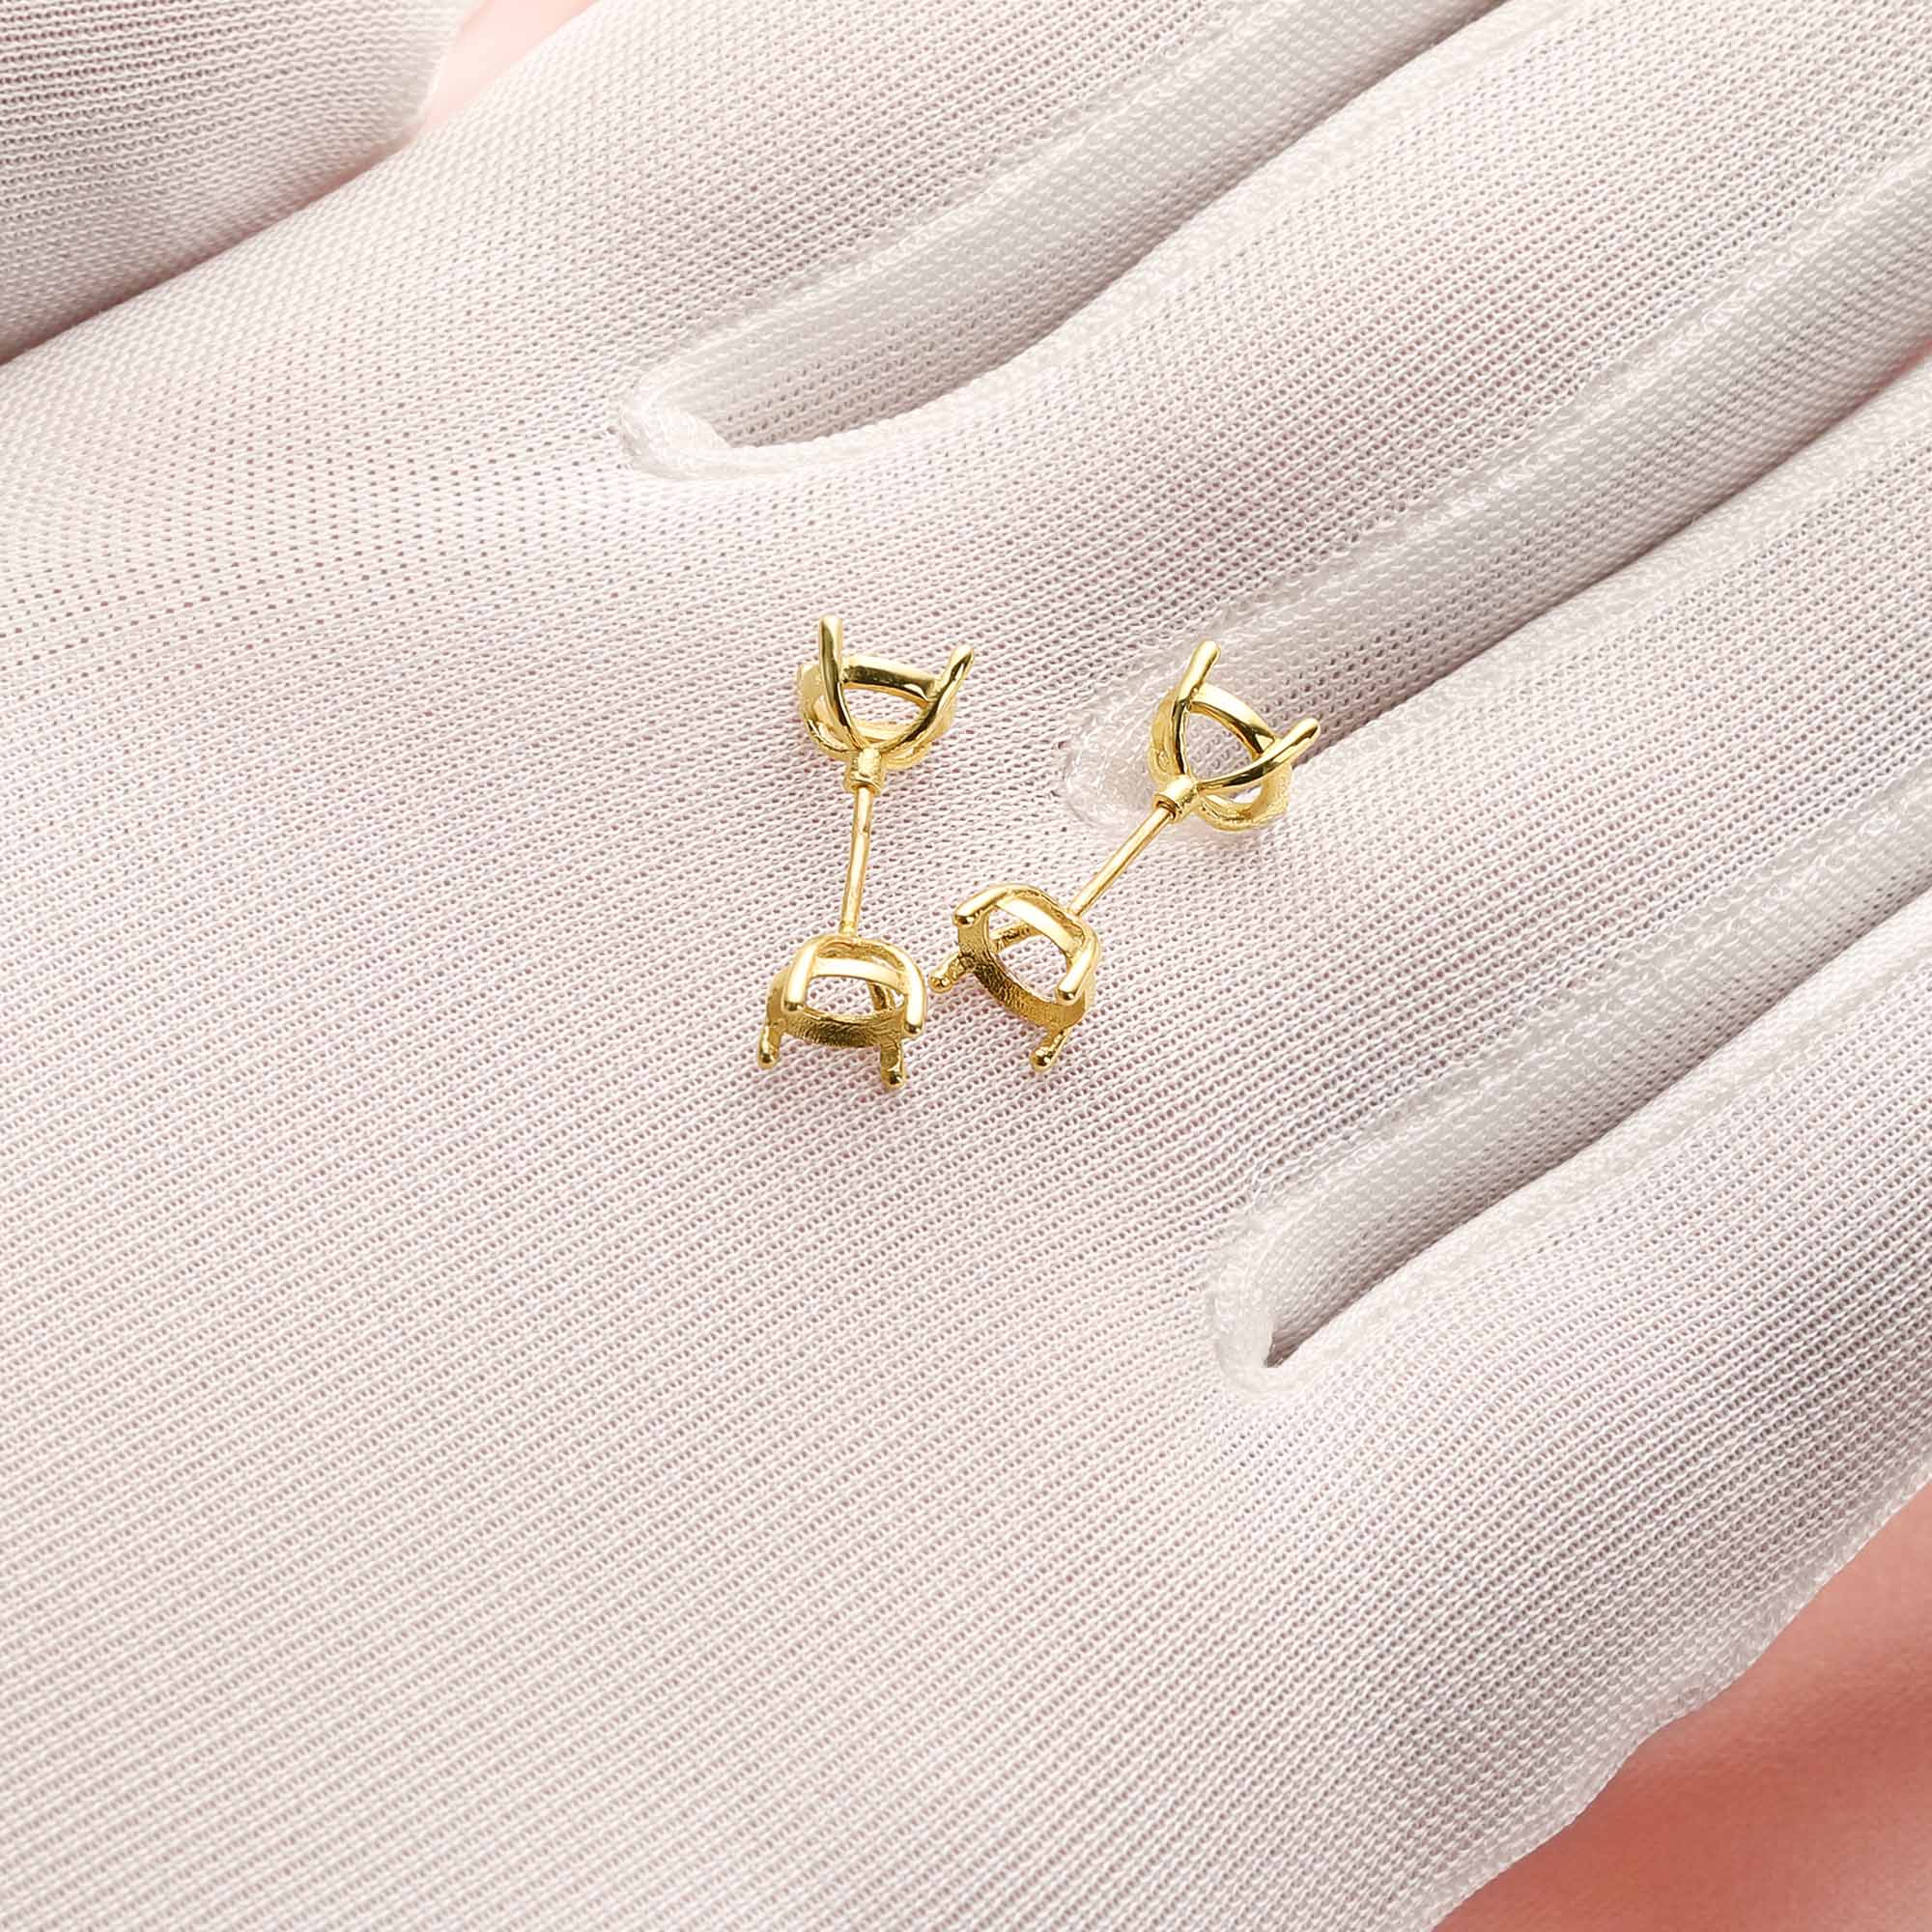 6MM Round Simple Prongs Studs Earrings Settings,Screwe Off Double Sides Bezels.Solid 14K Gold Earrings,DIY Earrings Supplies 1705075 - Click Image to Close